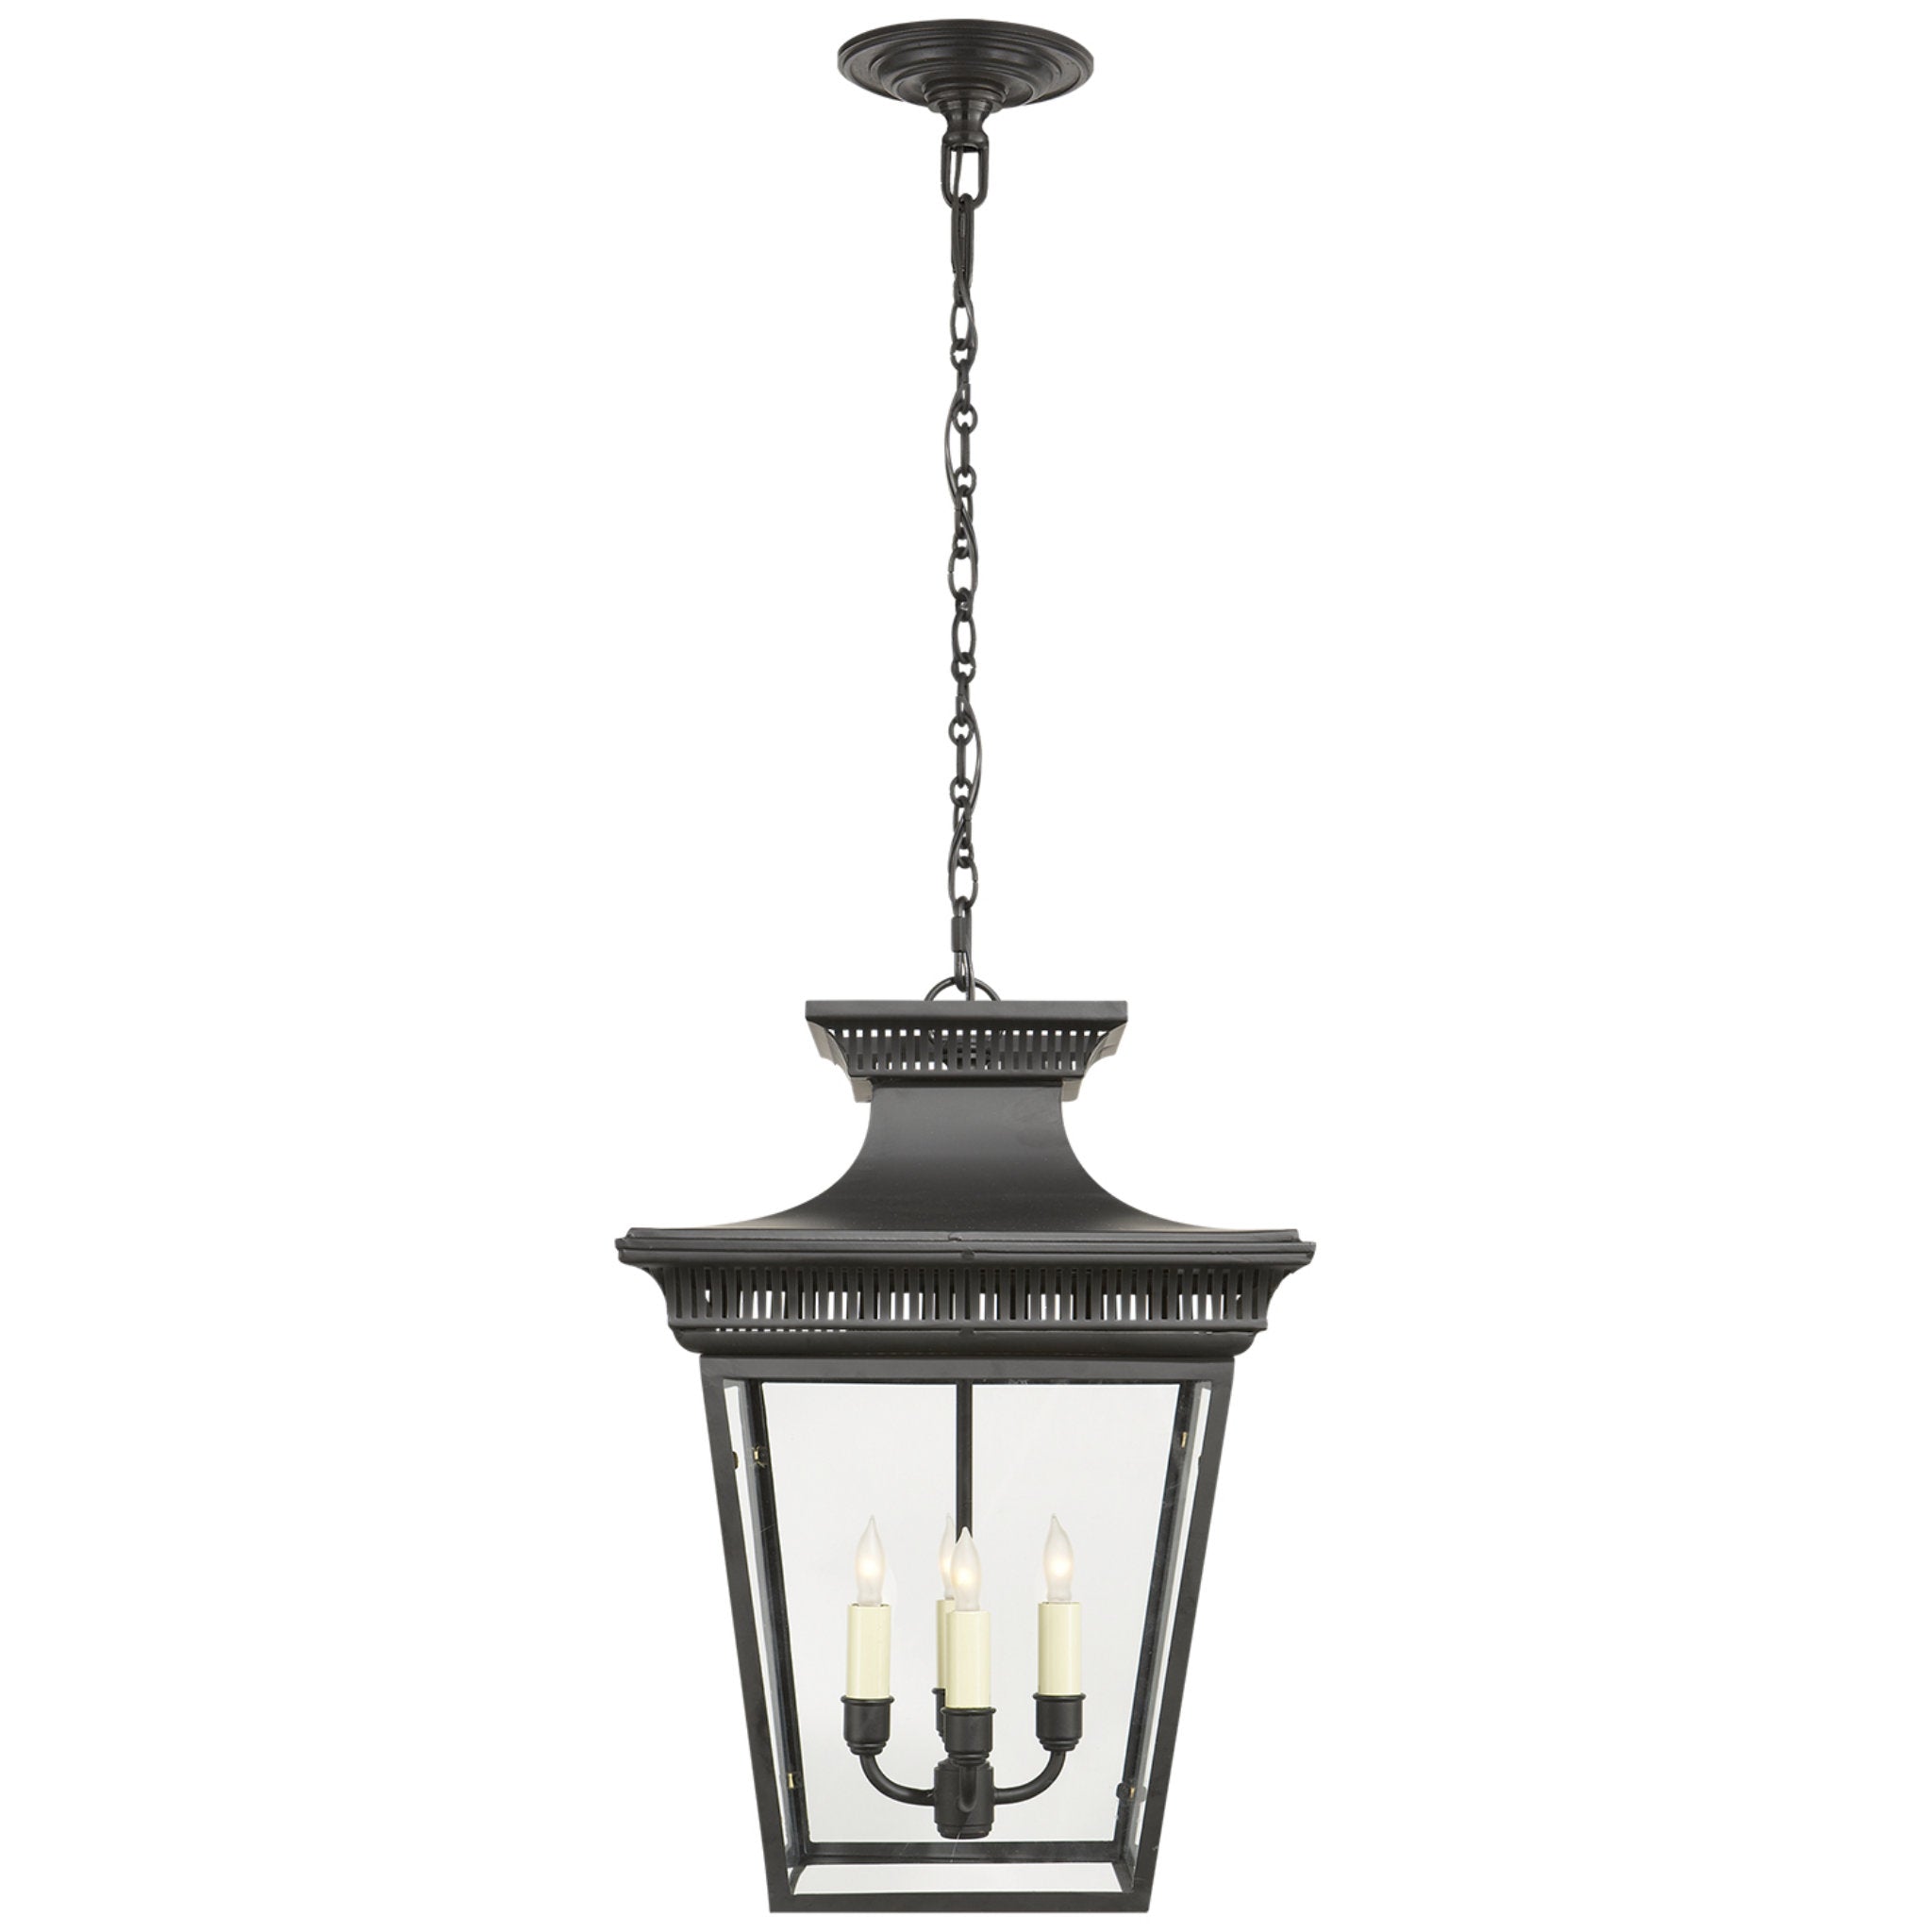 Chapman & Myers Elsinore Medium Hanging Lantern in Black with Clear Glass